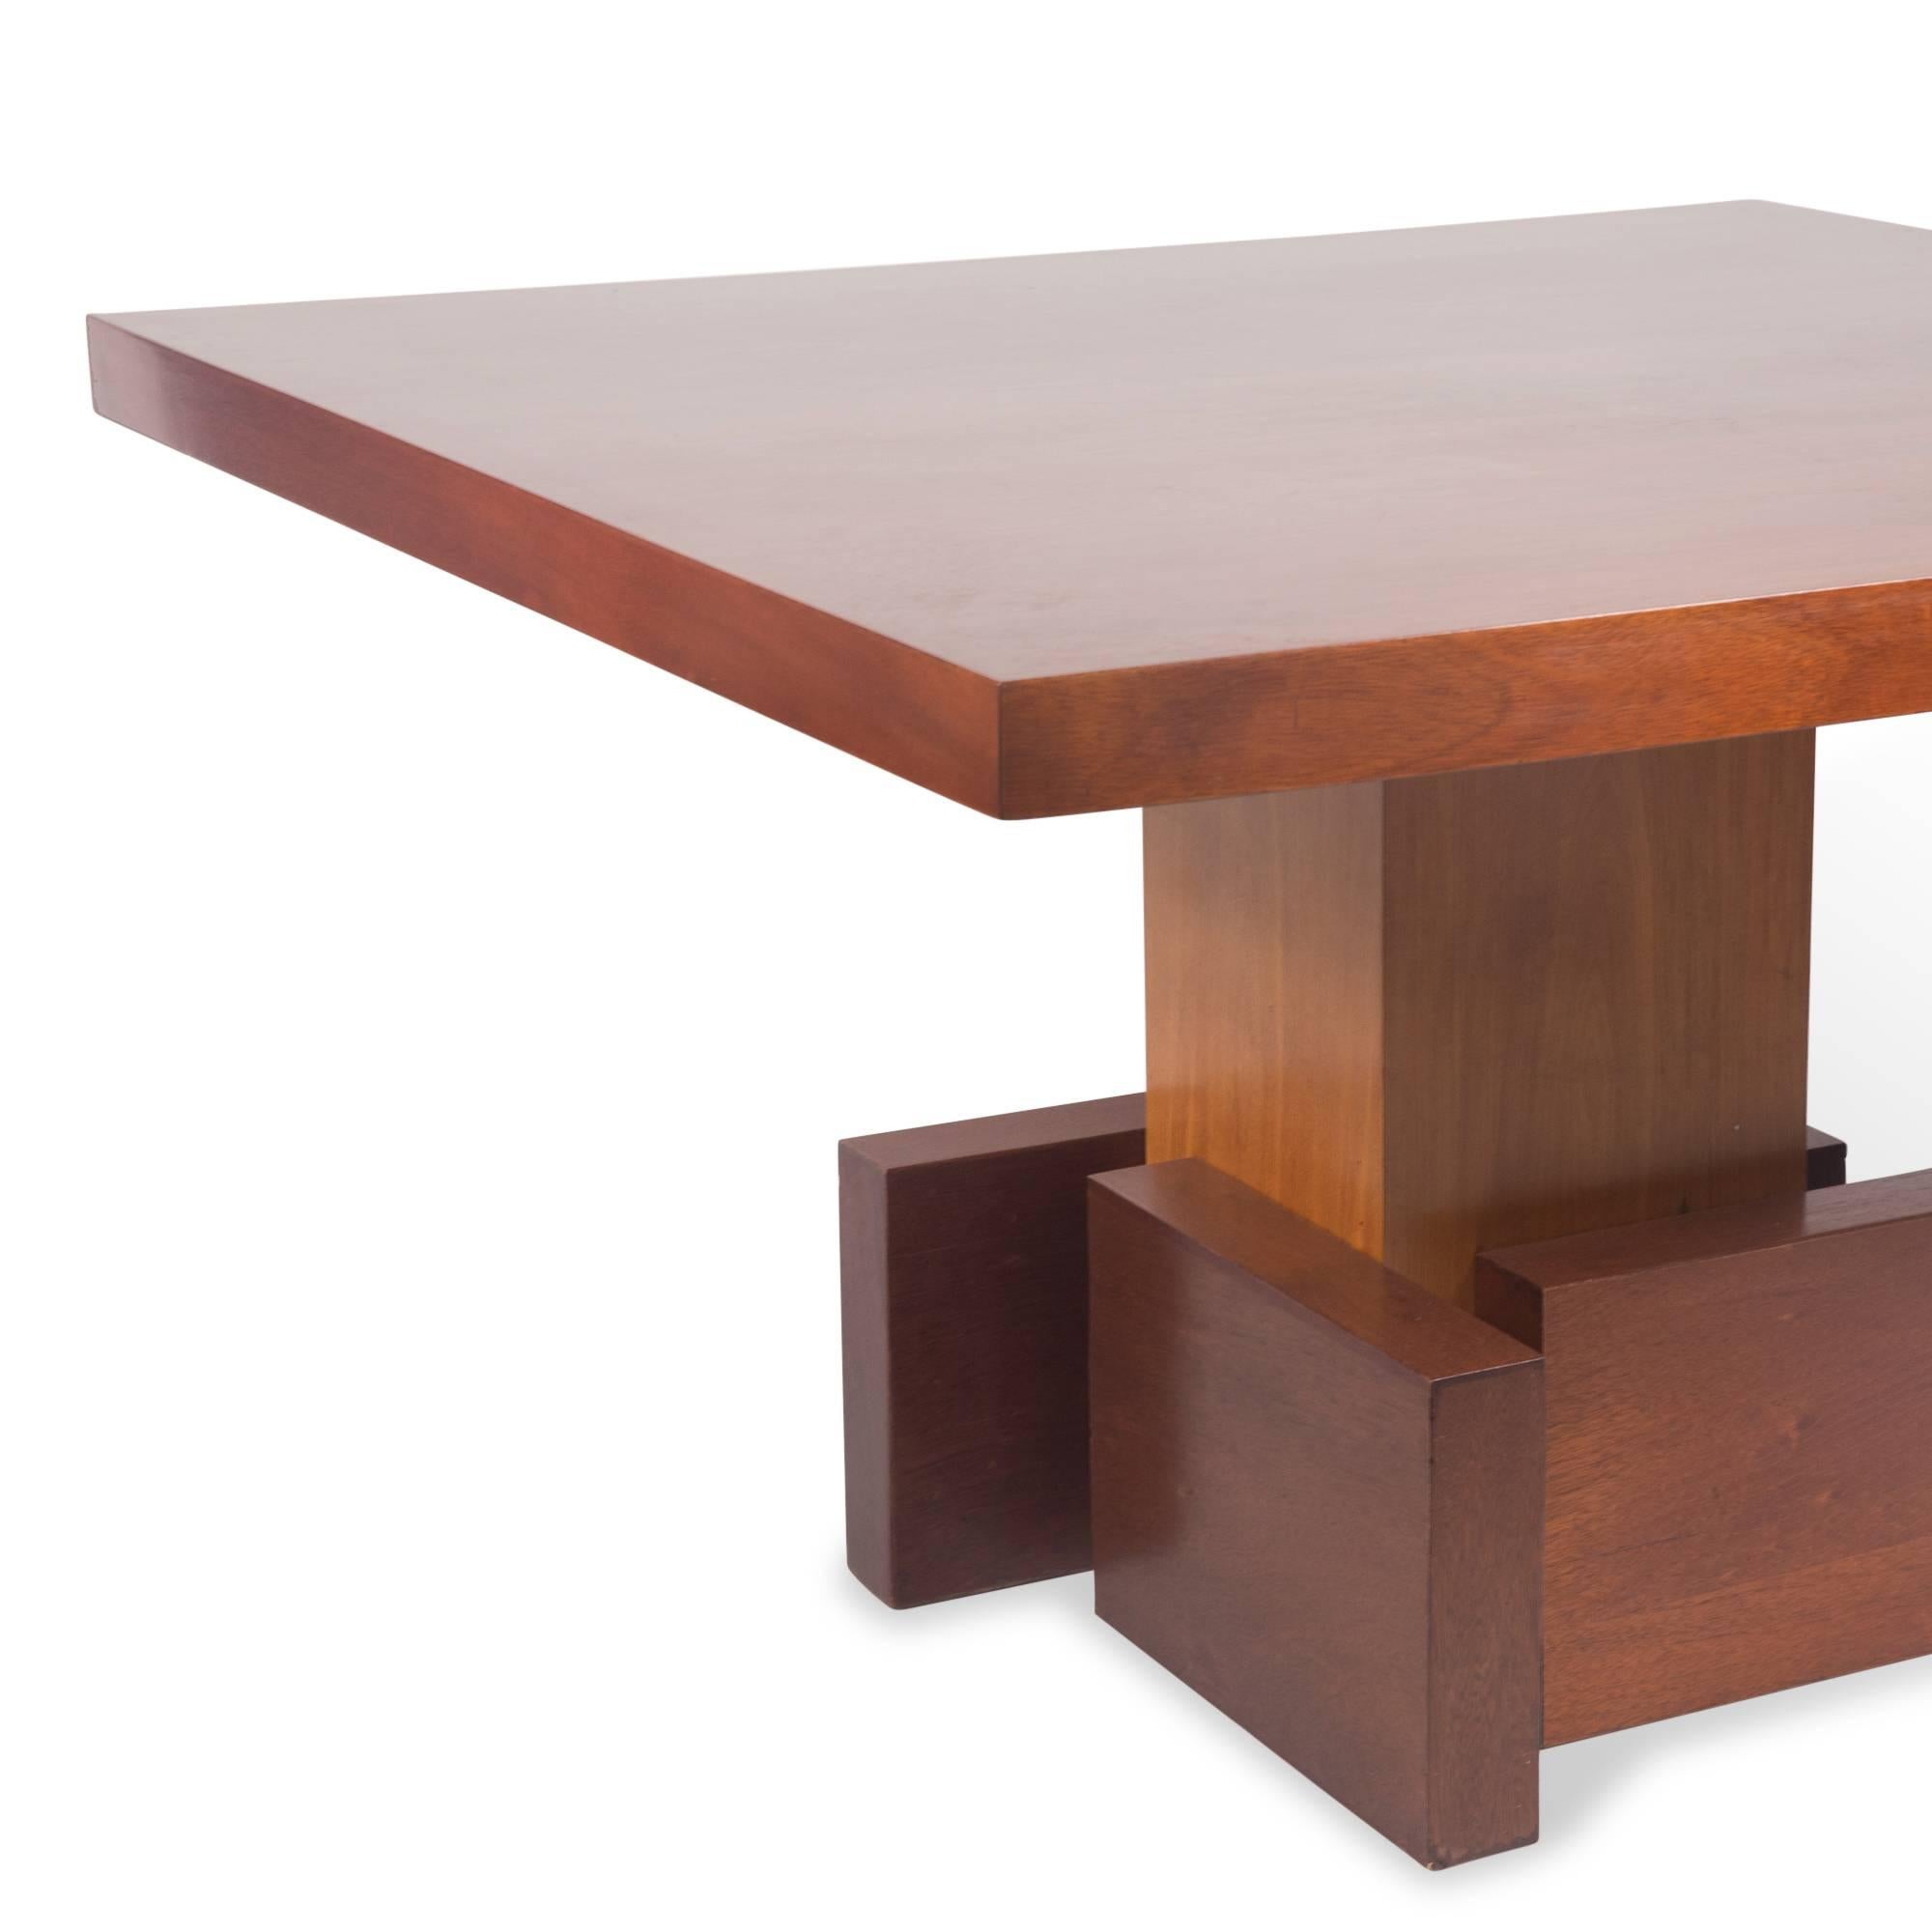 Cubist Pedestal Base Square Dining Table, French, 1930s In Excellent Condition For Sale In Hoboken, NJ